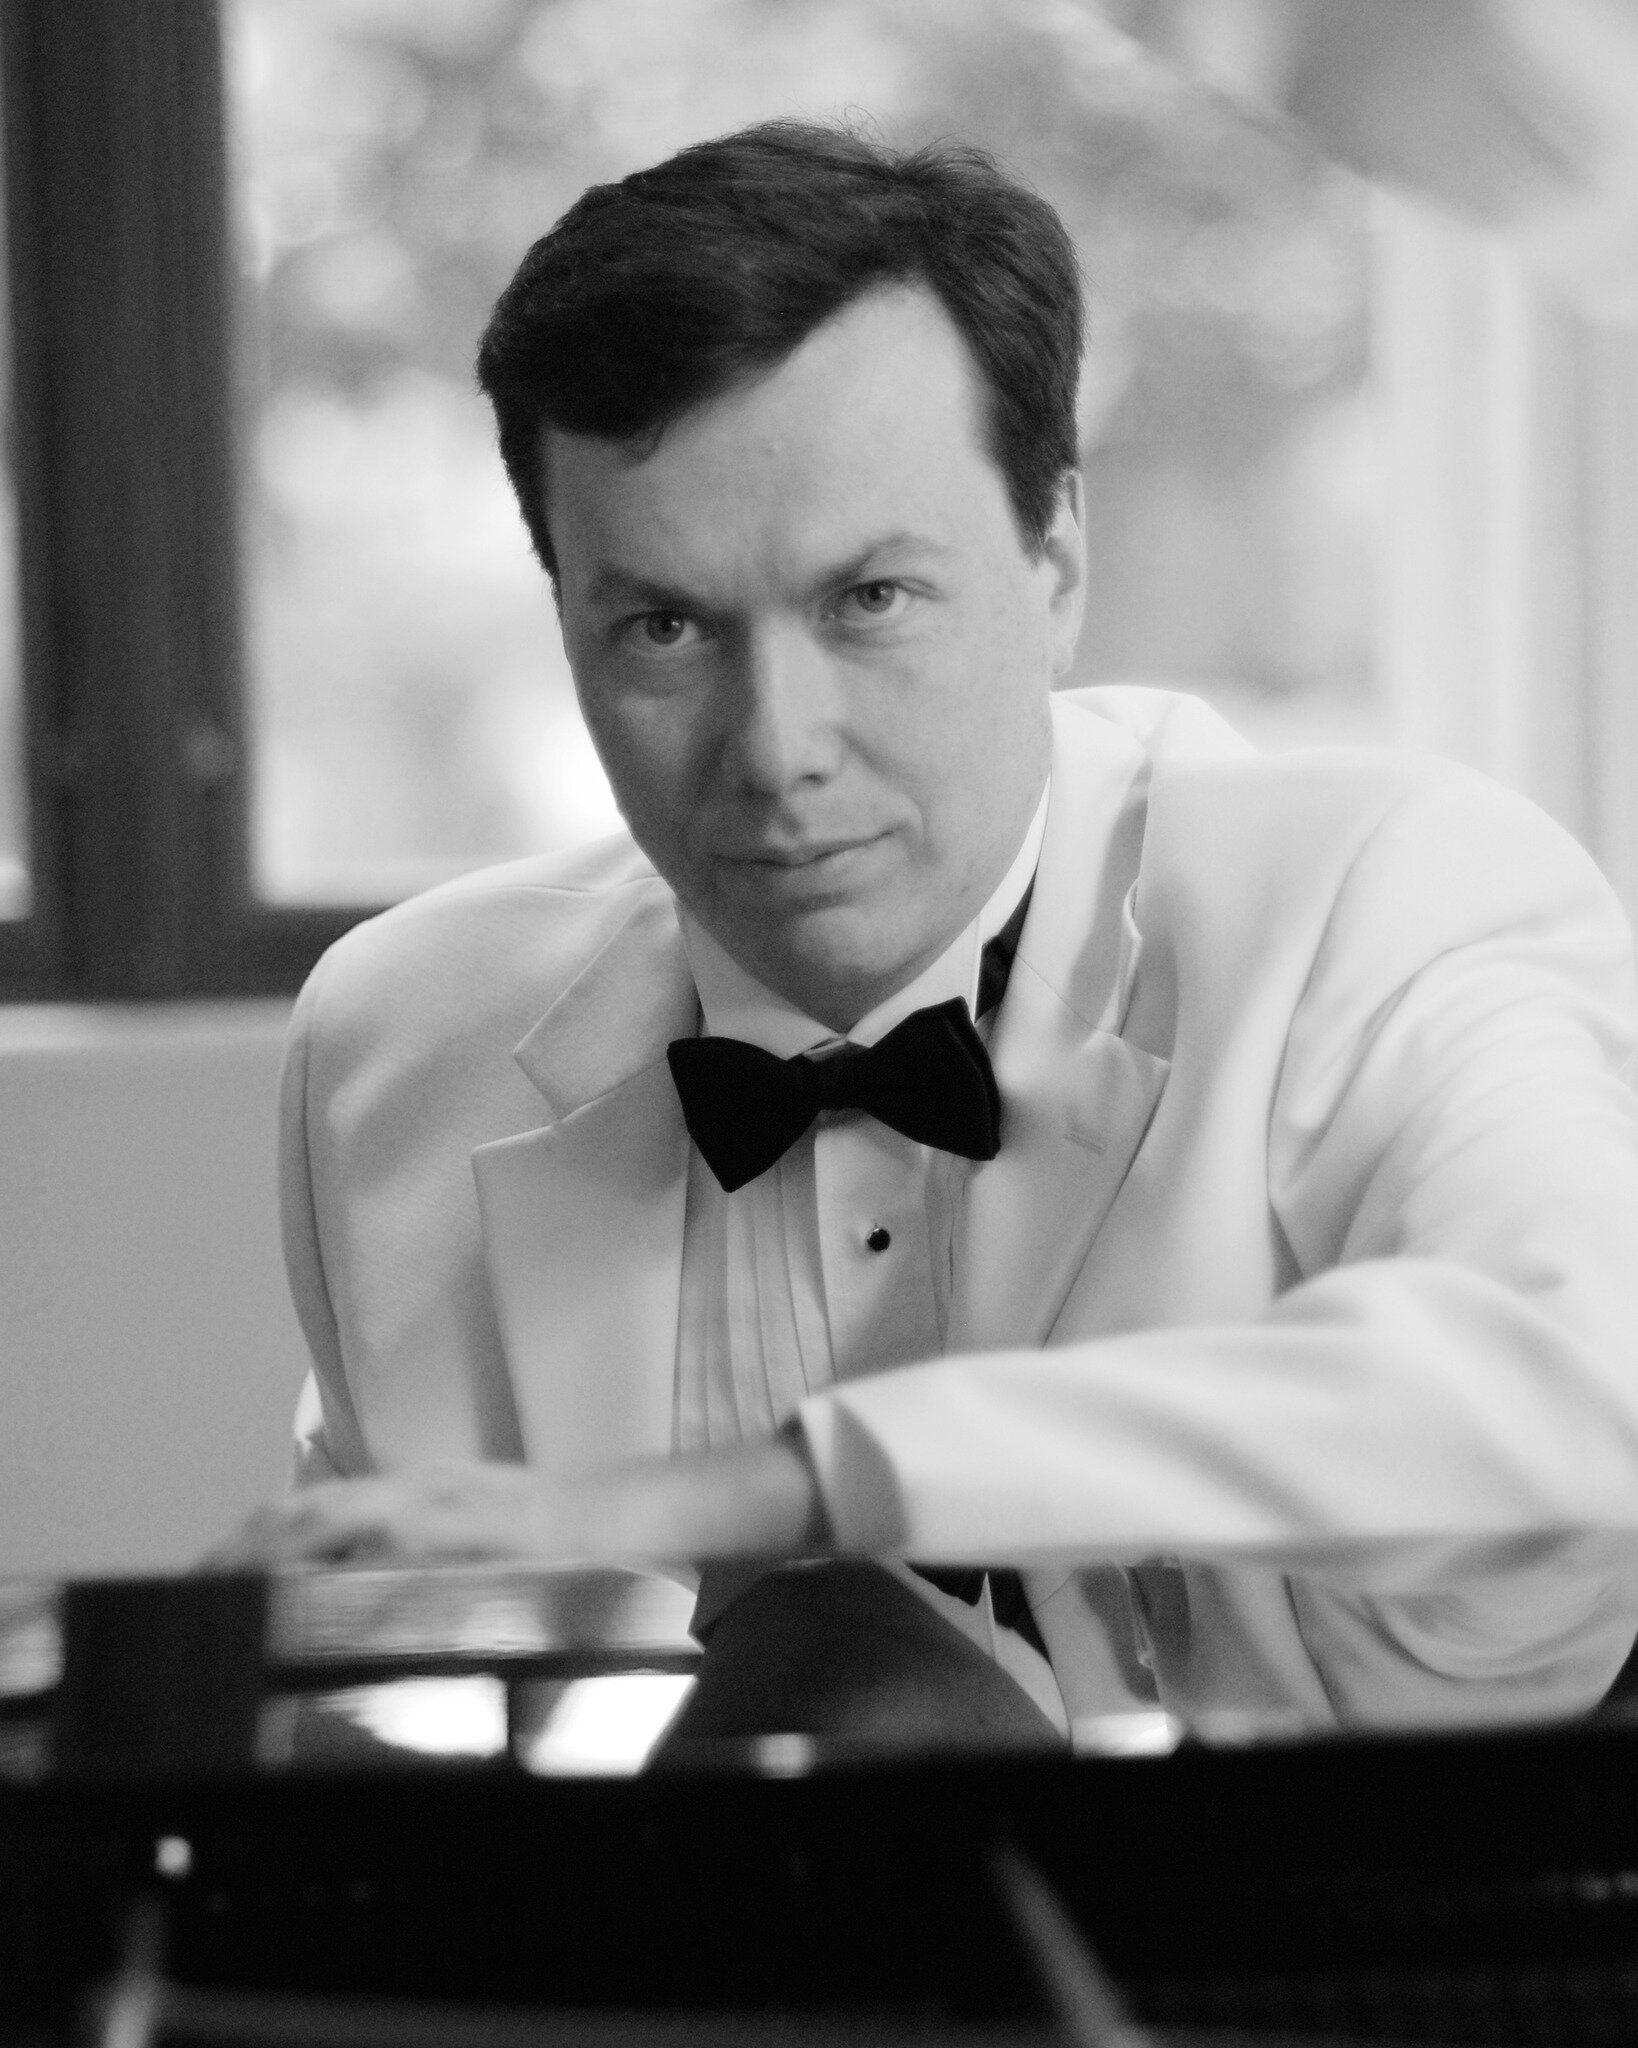 Kirill Gliadkosky Plays Classical and Romantic piano favorites. Saturday, March 15, 3:00 PM, at the Anderson Museum of Contemporary Art, 409 E. College Blvd., Roswell.

Performing music by Bach, Mozart, Chopin, Tchaikovsky, Brahms, Gershwin, and othe